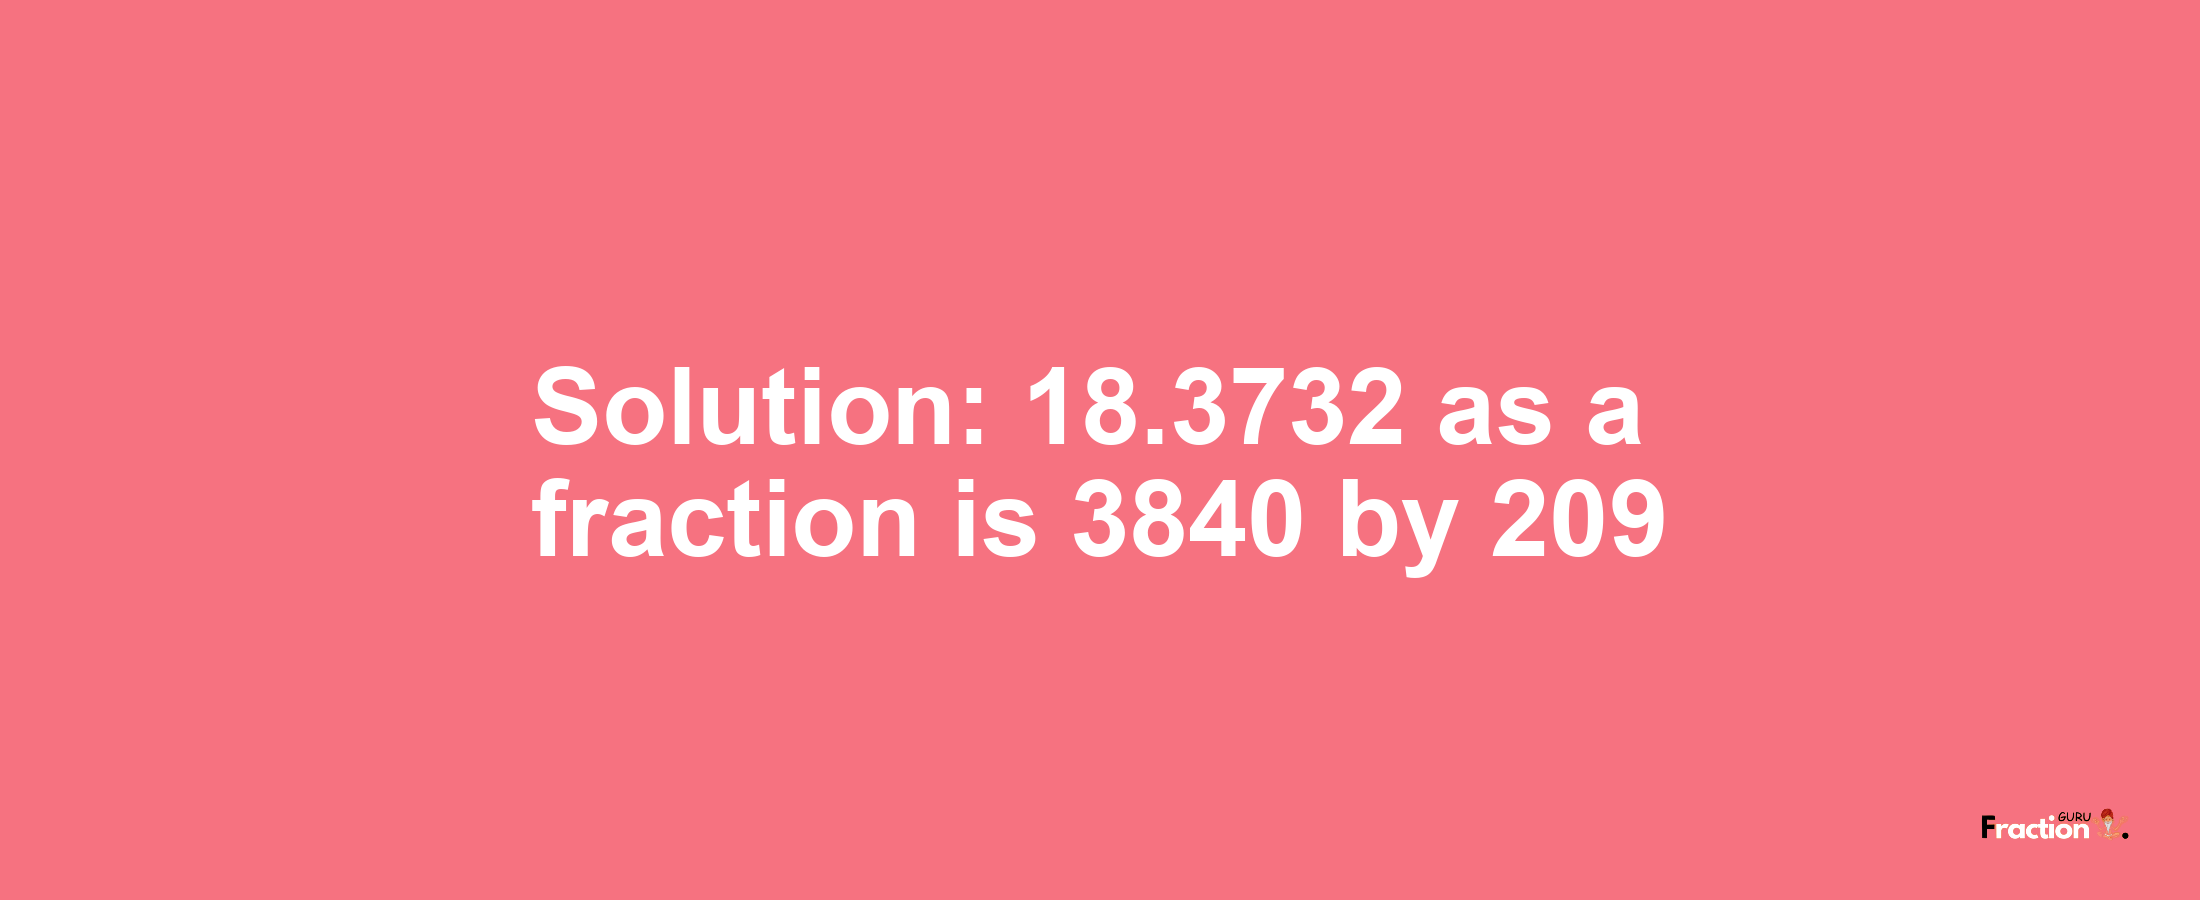 Solution:18.3732 as a fraction is 3840/209